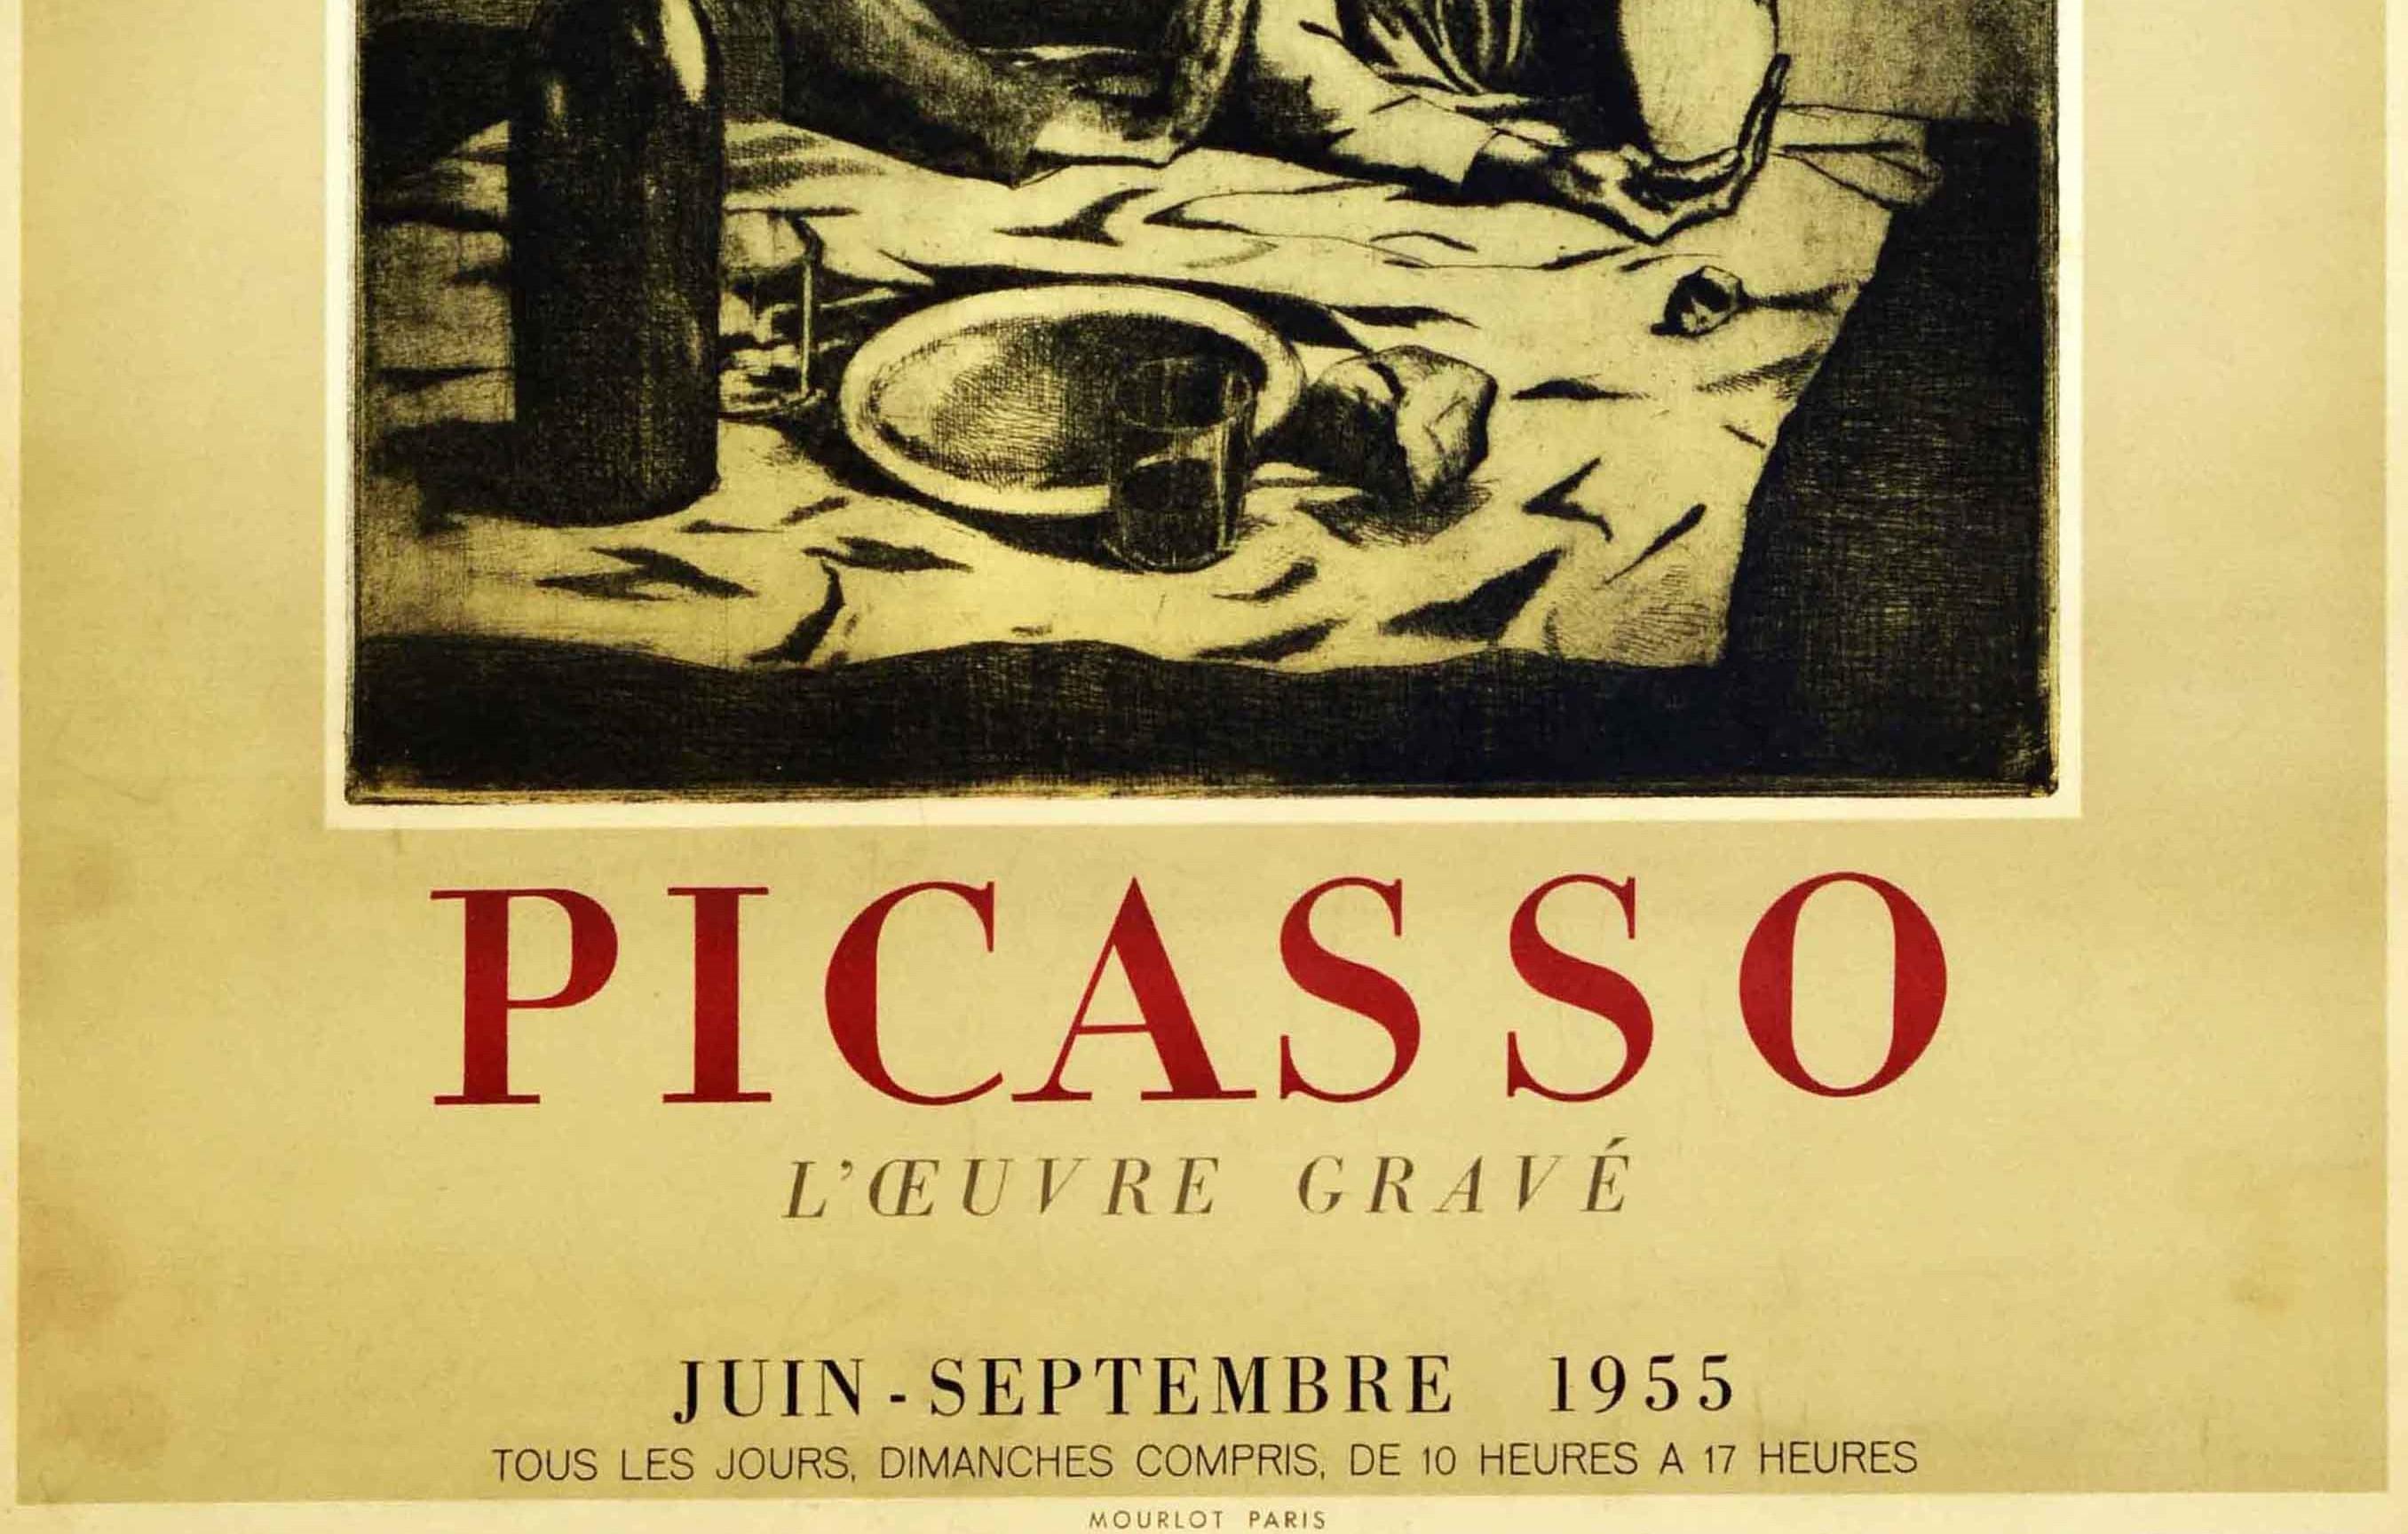 French Original Vintage Art Poster Picasso Engraving Exhibition Le Repas Frugal Meal For Sale